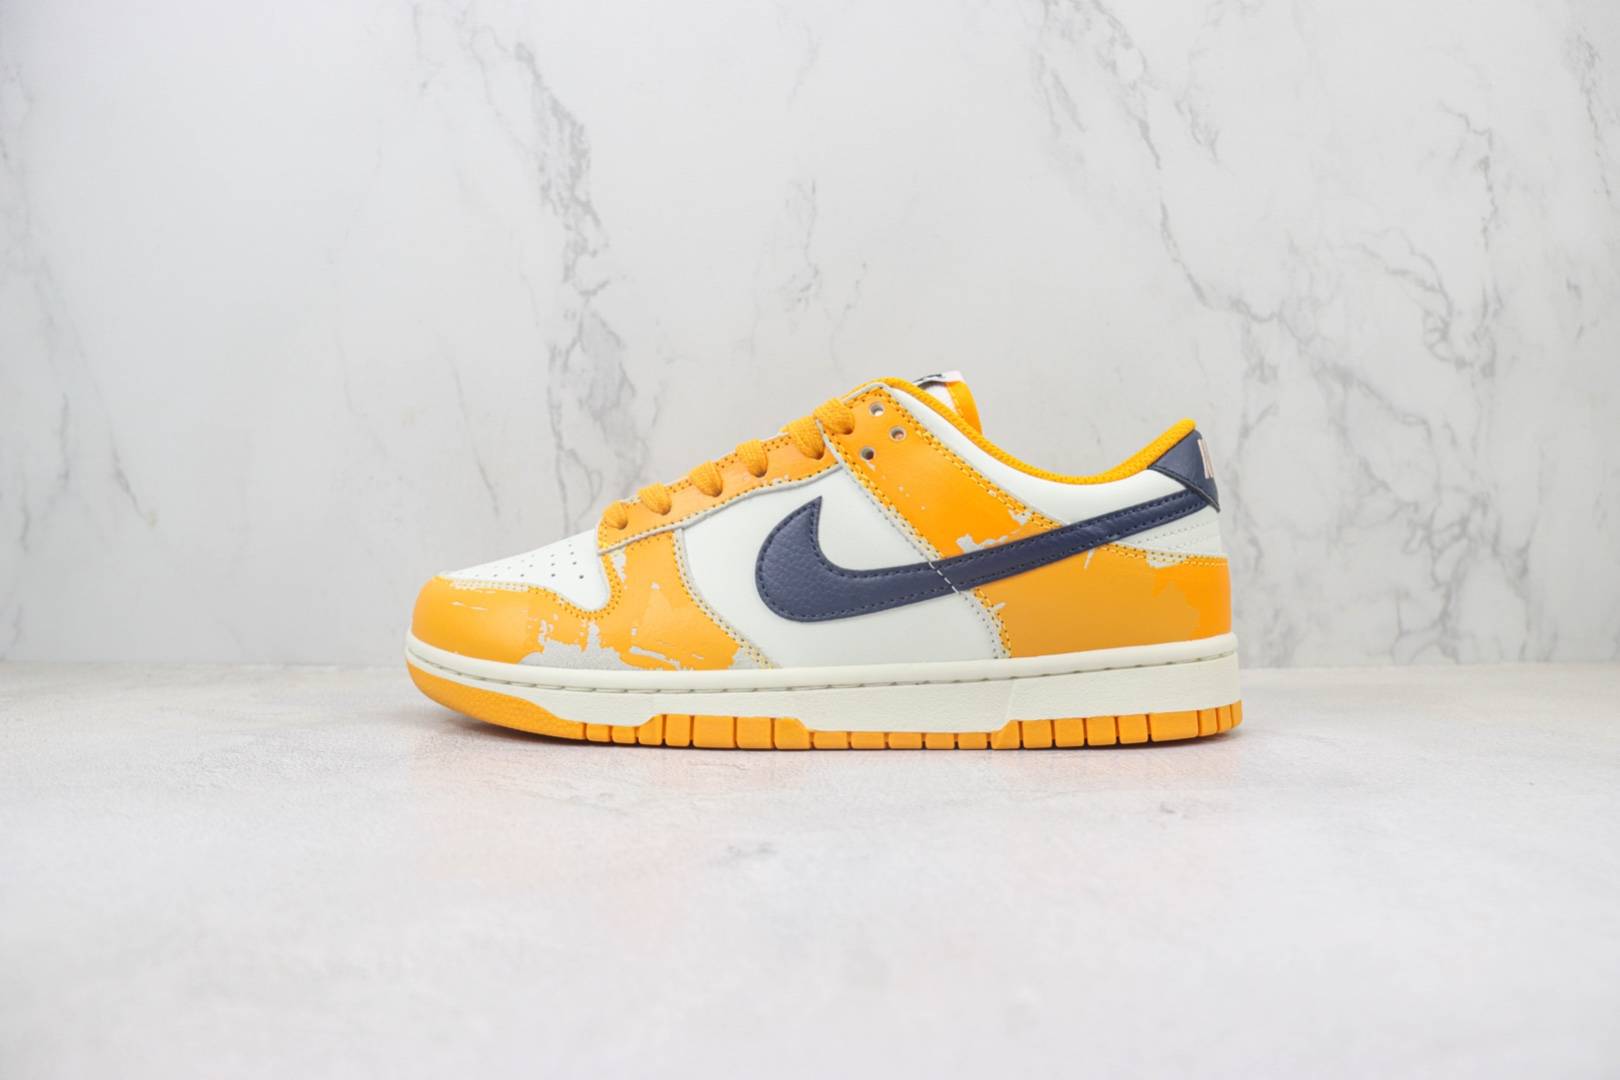 Nike Dunk Low Wear and Tear 刷漆 做旧 复古 白橙 深蓝勾 FN3418-100